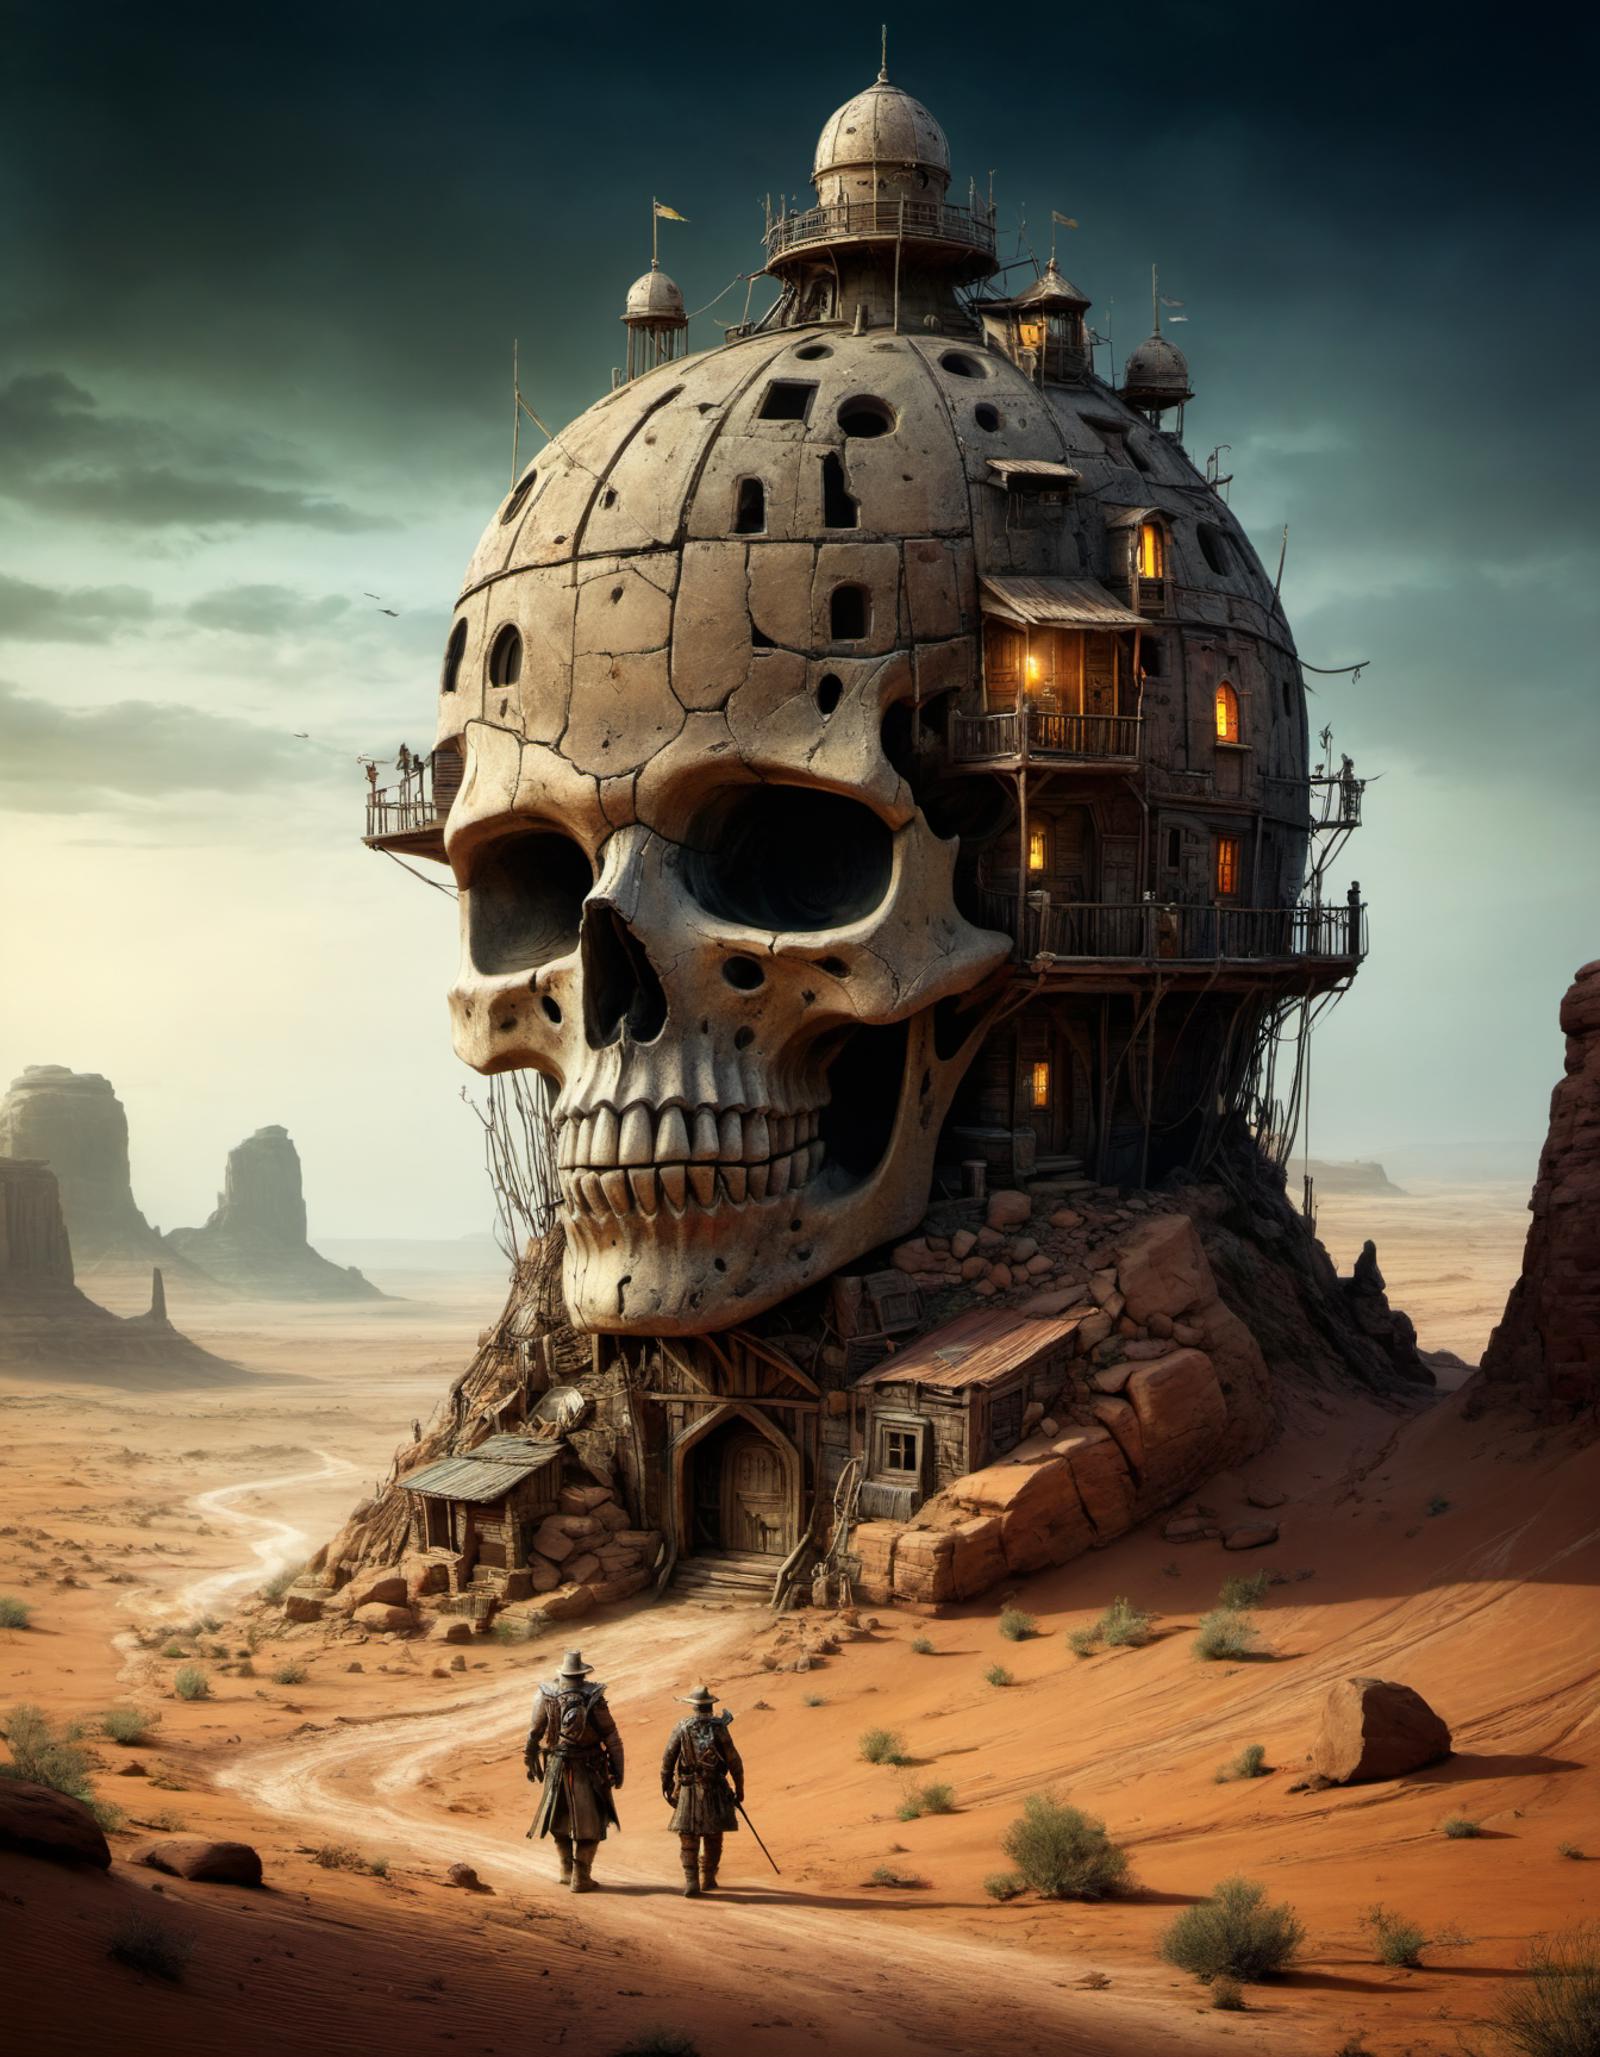 A painting of a skeleton head with a house on it in a desert.